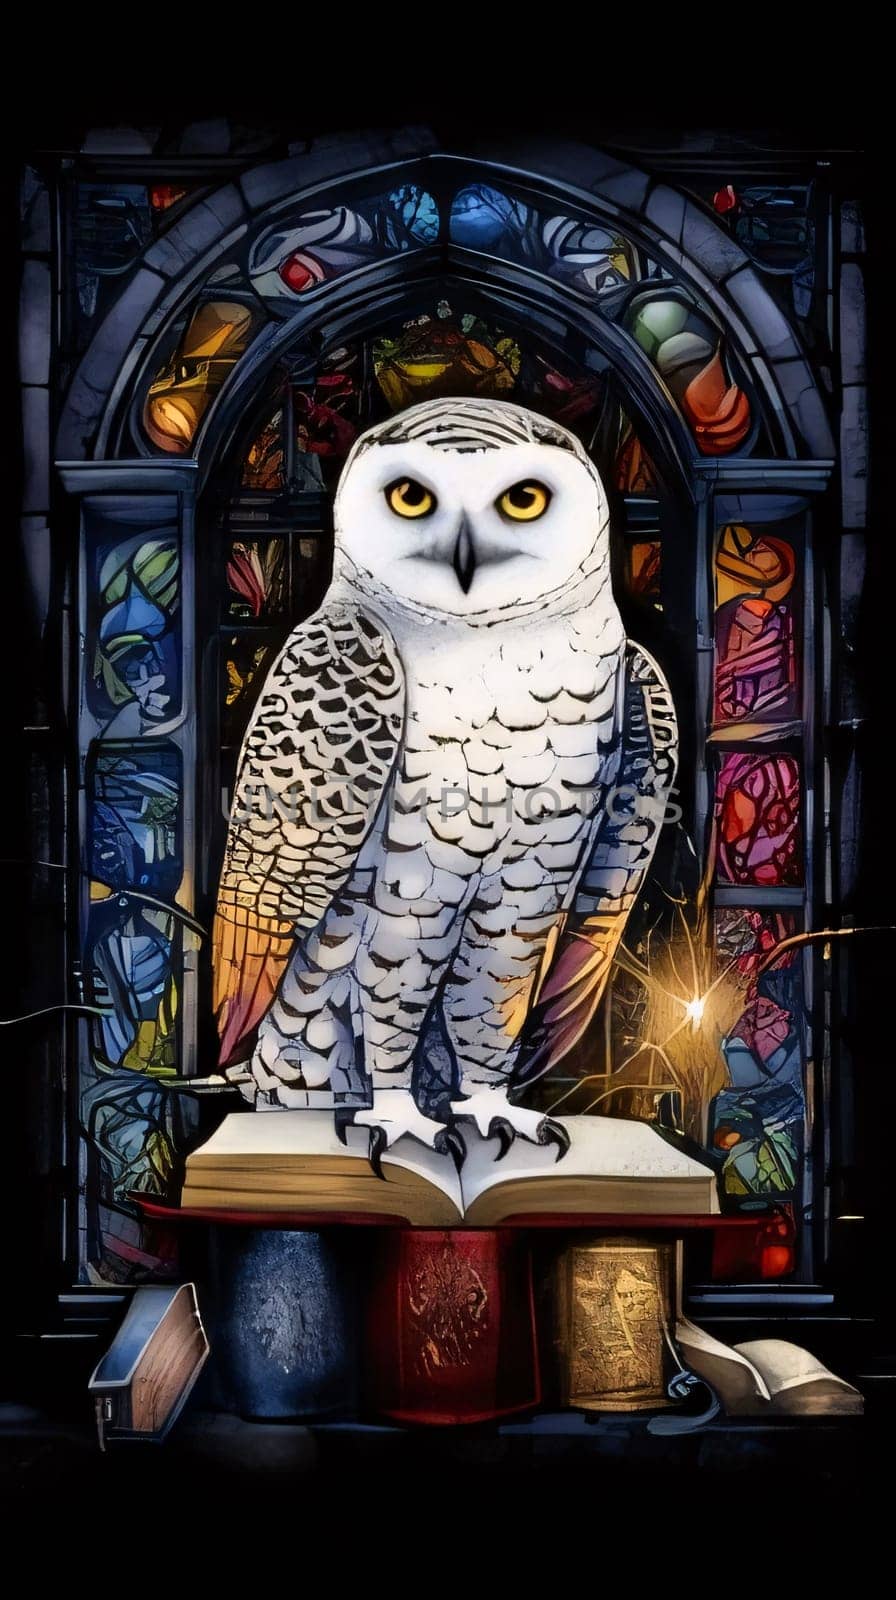 Owl sitting on a book in front of a stained glass window by ThemesS